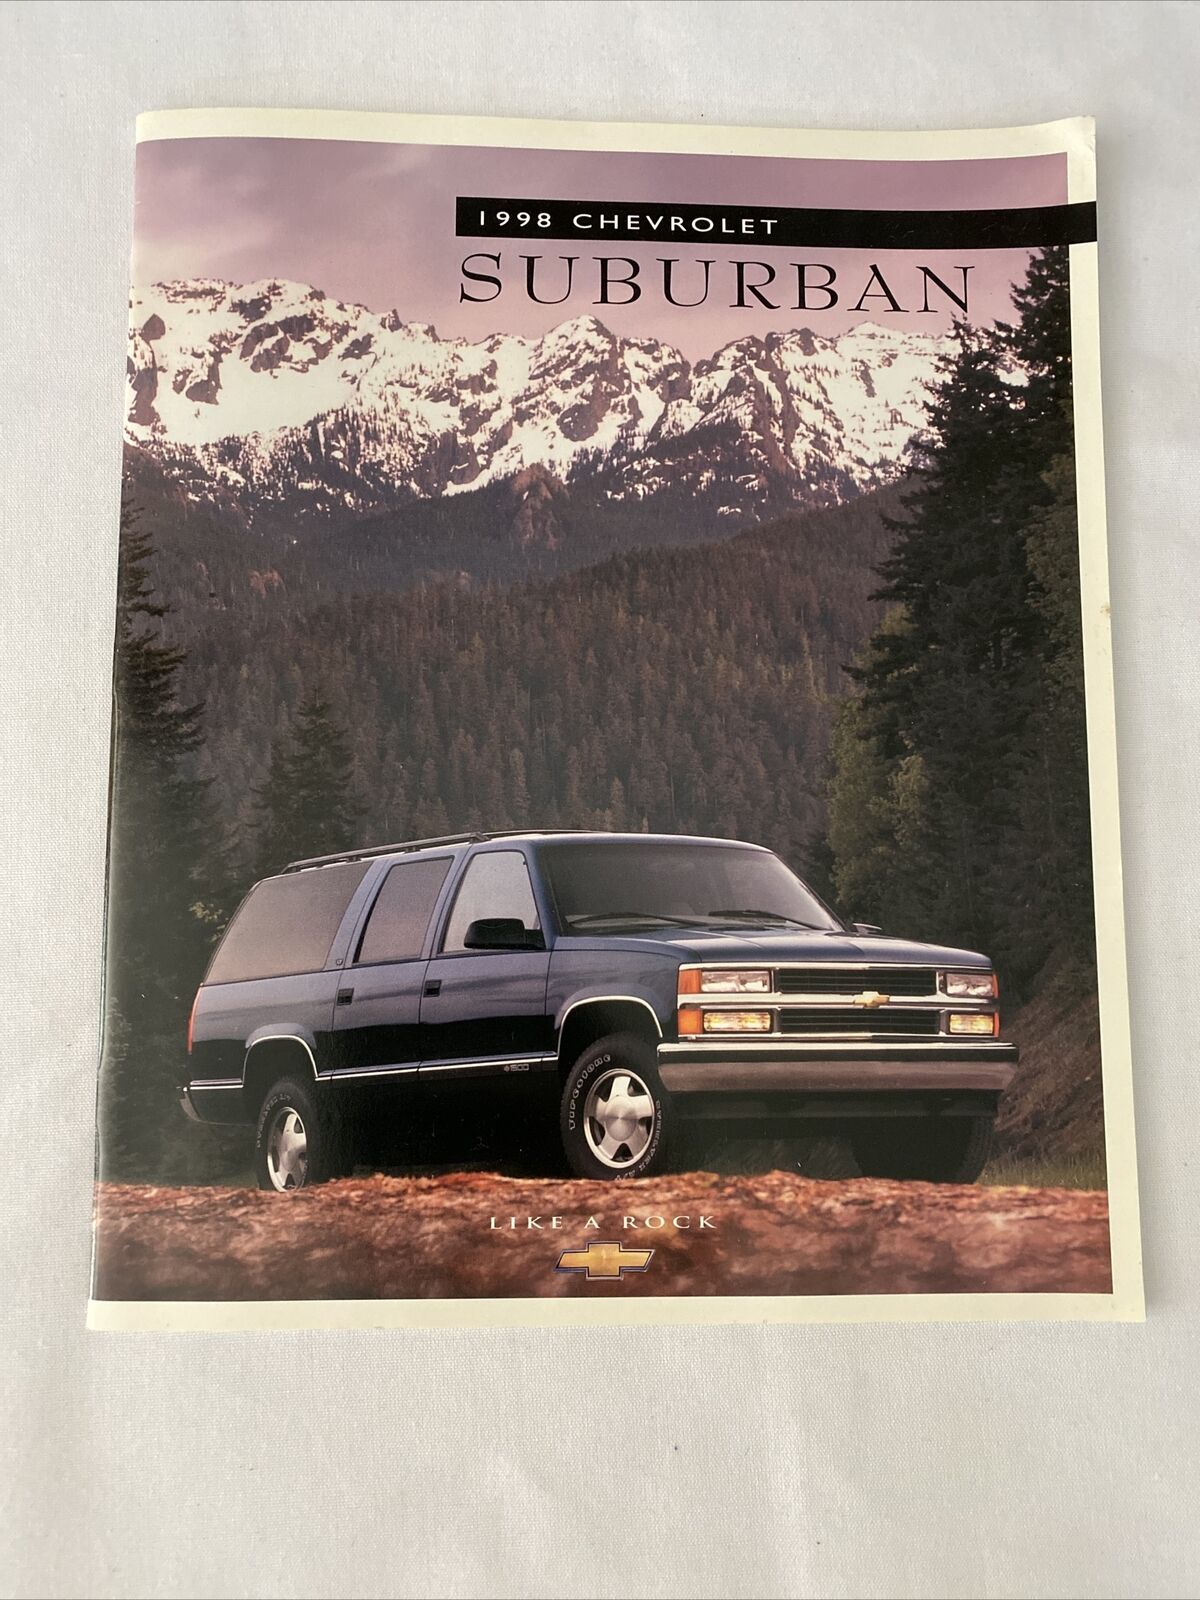 1998 Chevrolet Brochure SUBURBAN Great Info & Pictures CHEVY LIKE A ROCK (CP155)